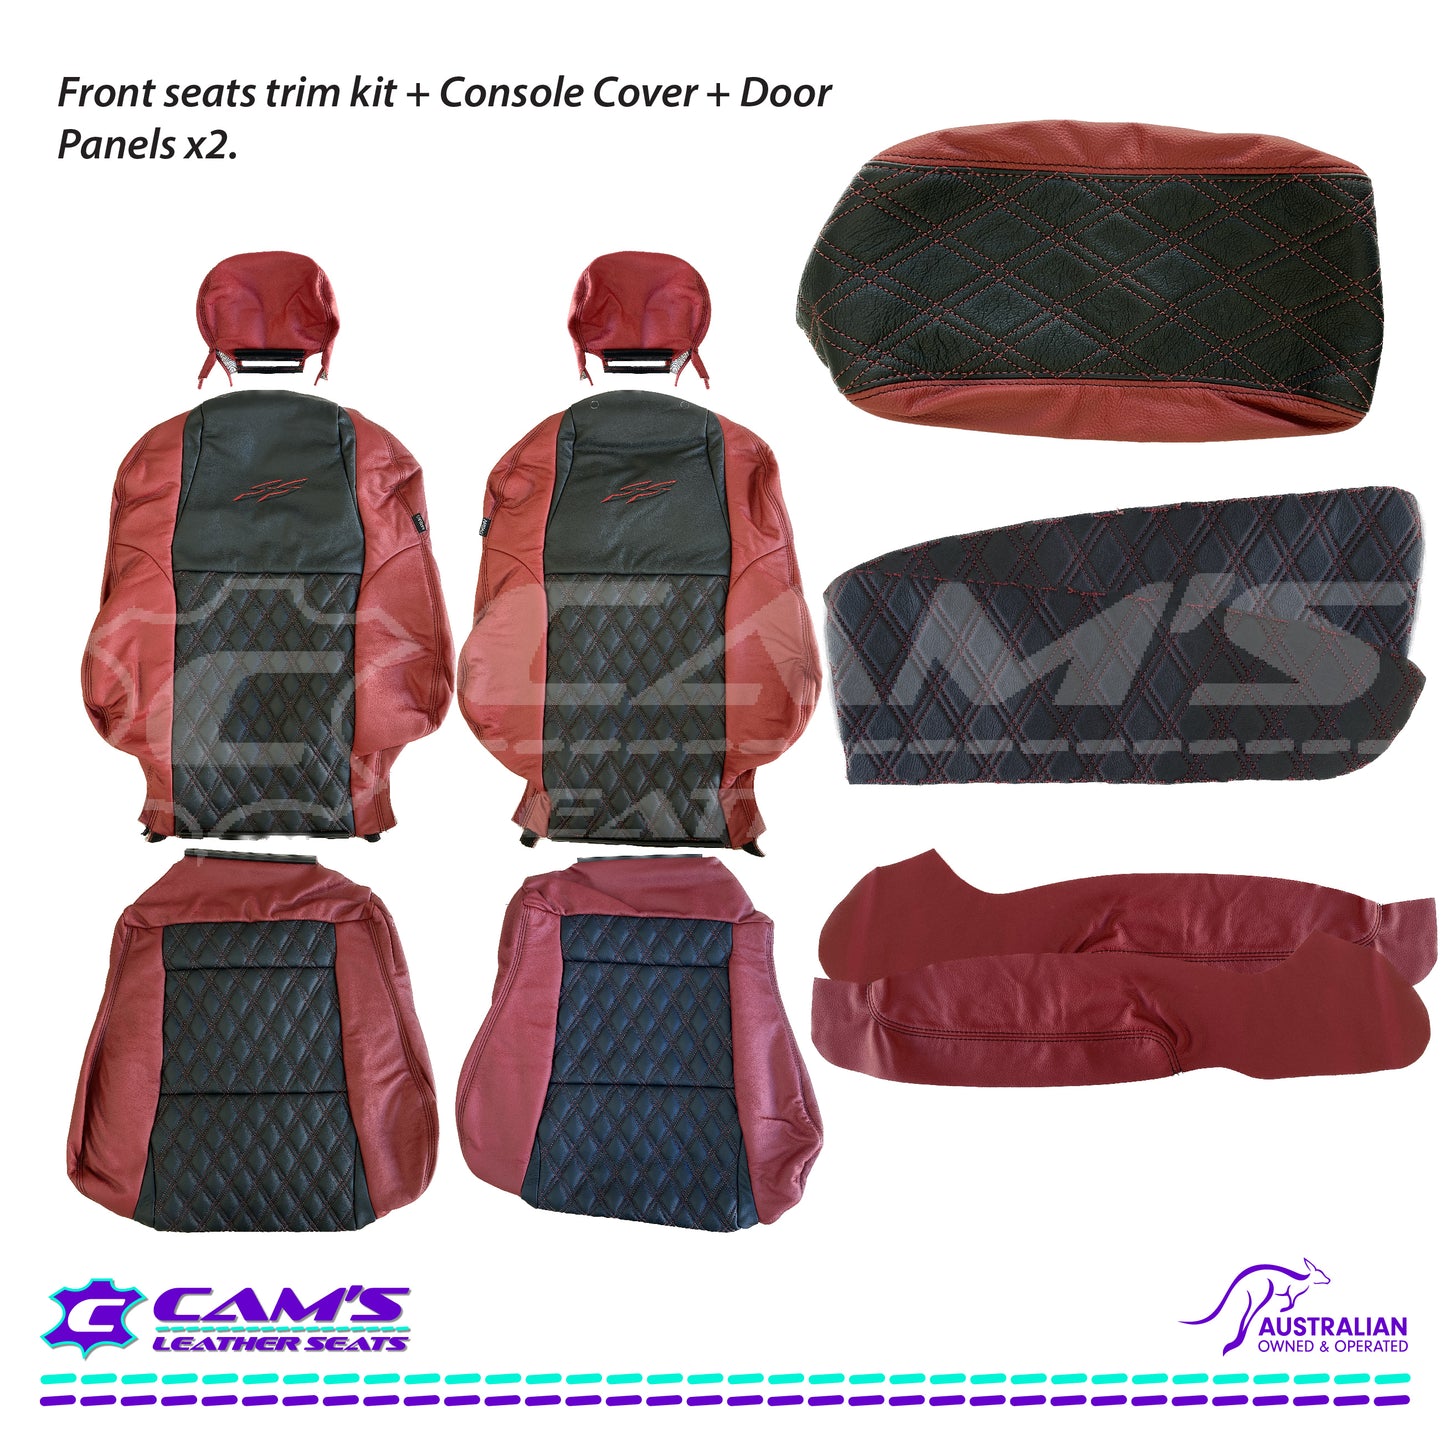 LEATHER SEATS TRIM KIT FOR VY/VZ SS UTE 2 FRONT SEATS RED/BLACK DIAMOND STITCH